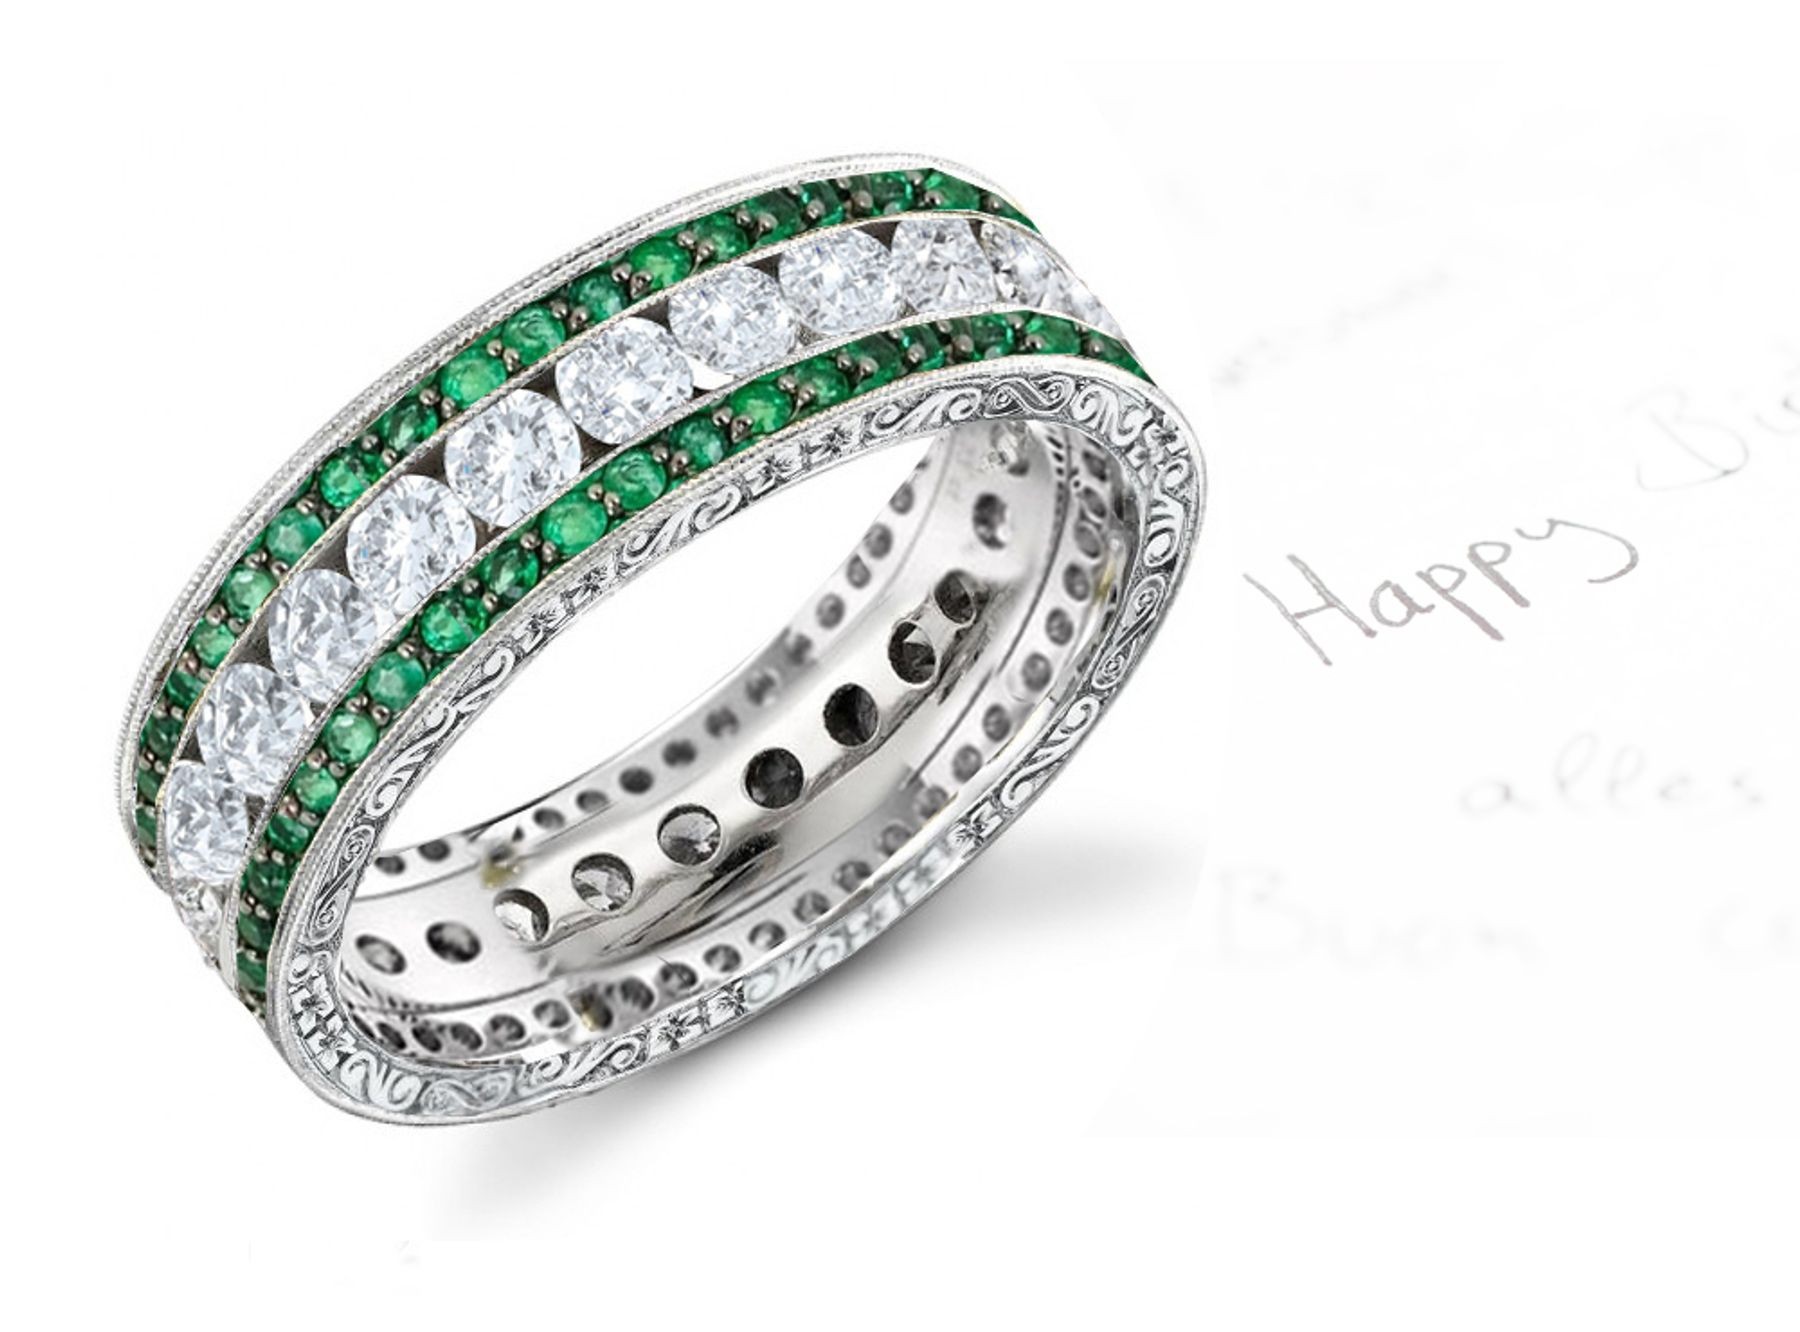 Emerald & Diamond Band Bordered with 2 Rows of Diamonds, Engraved Sides